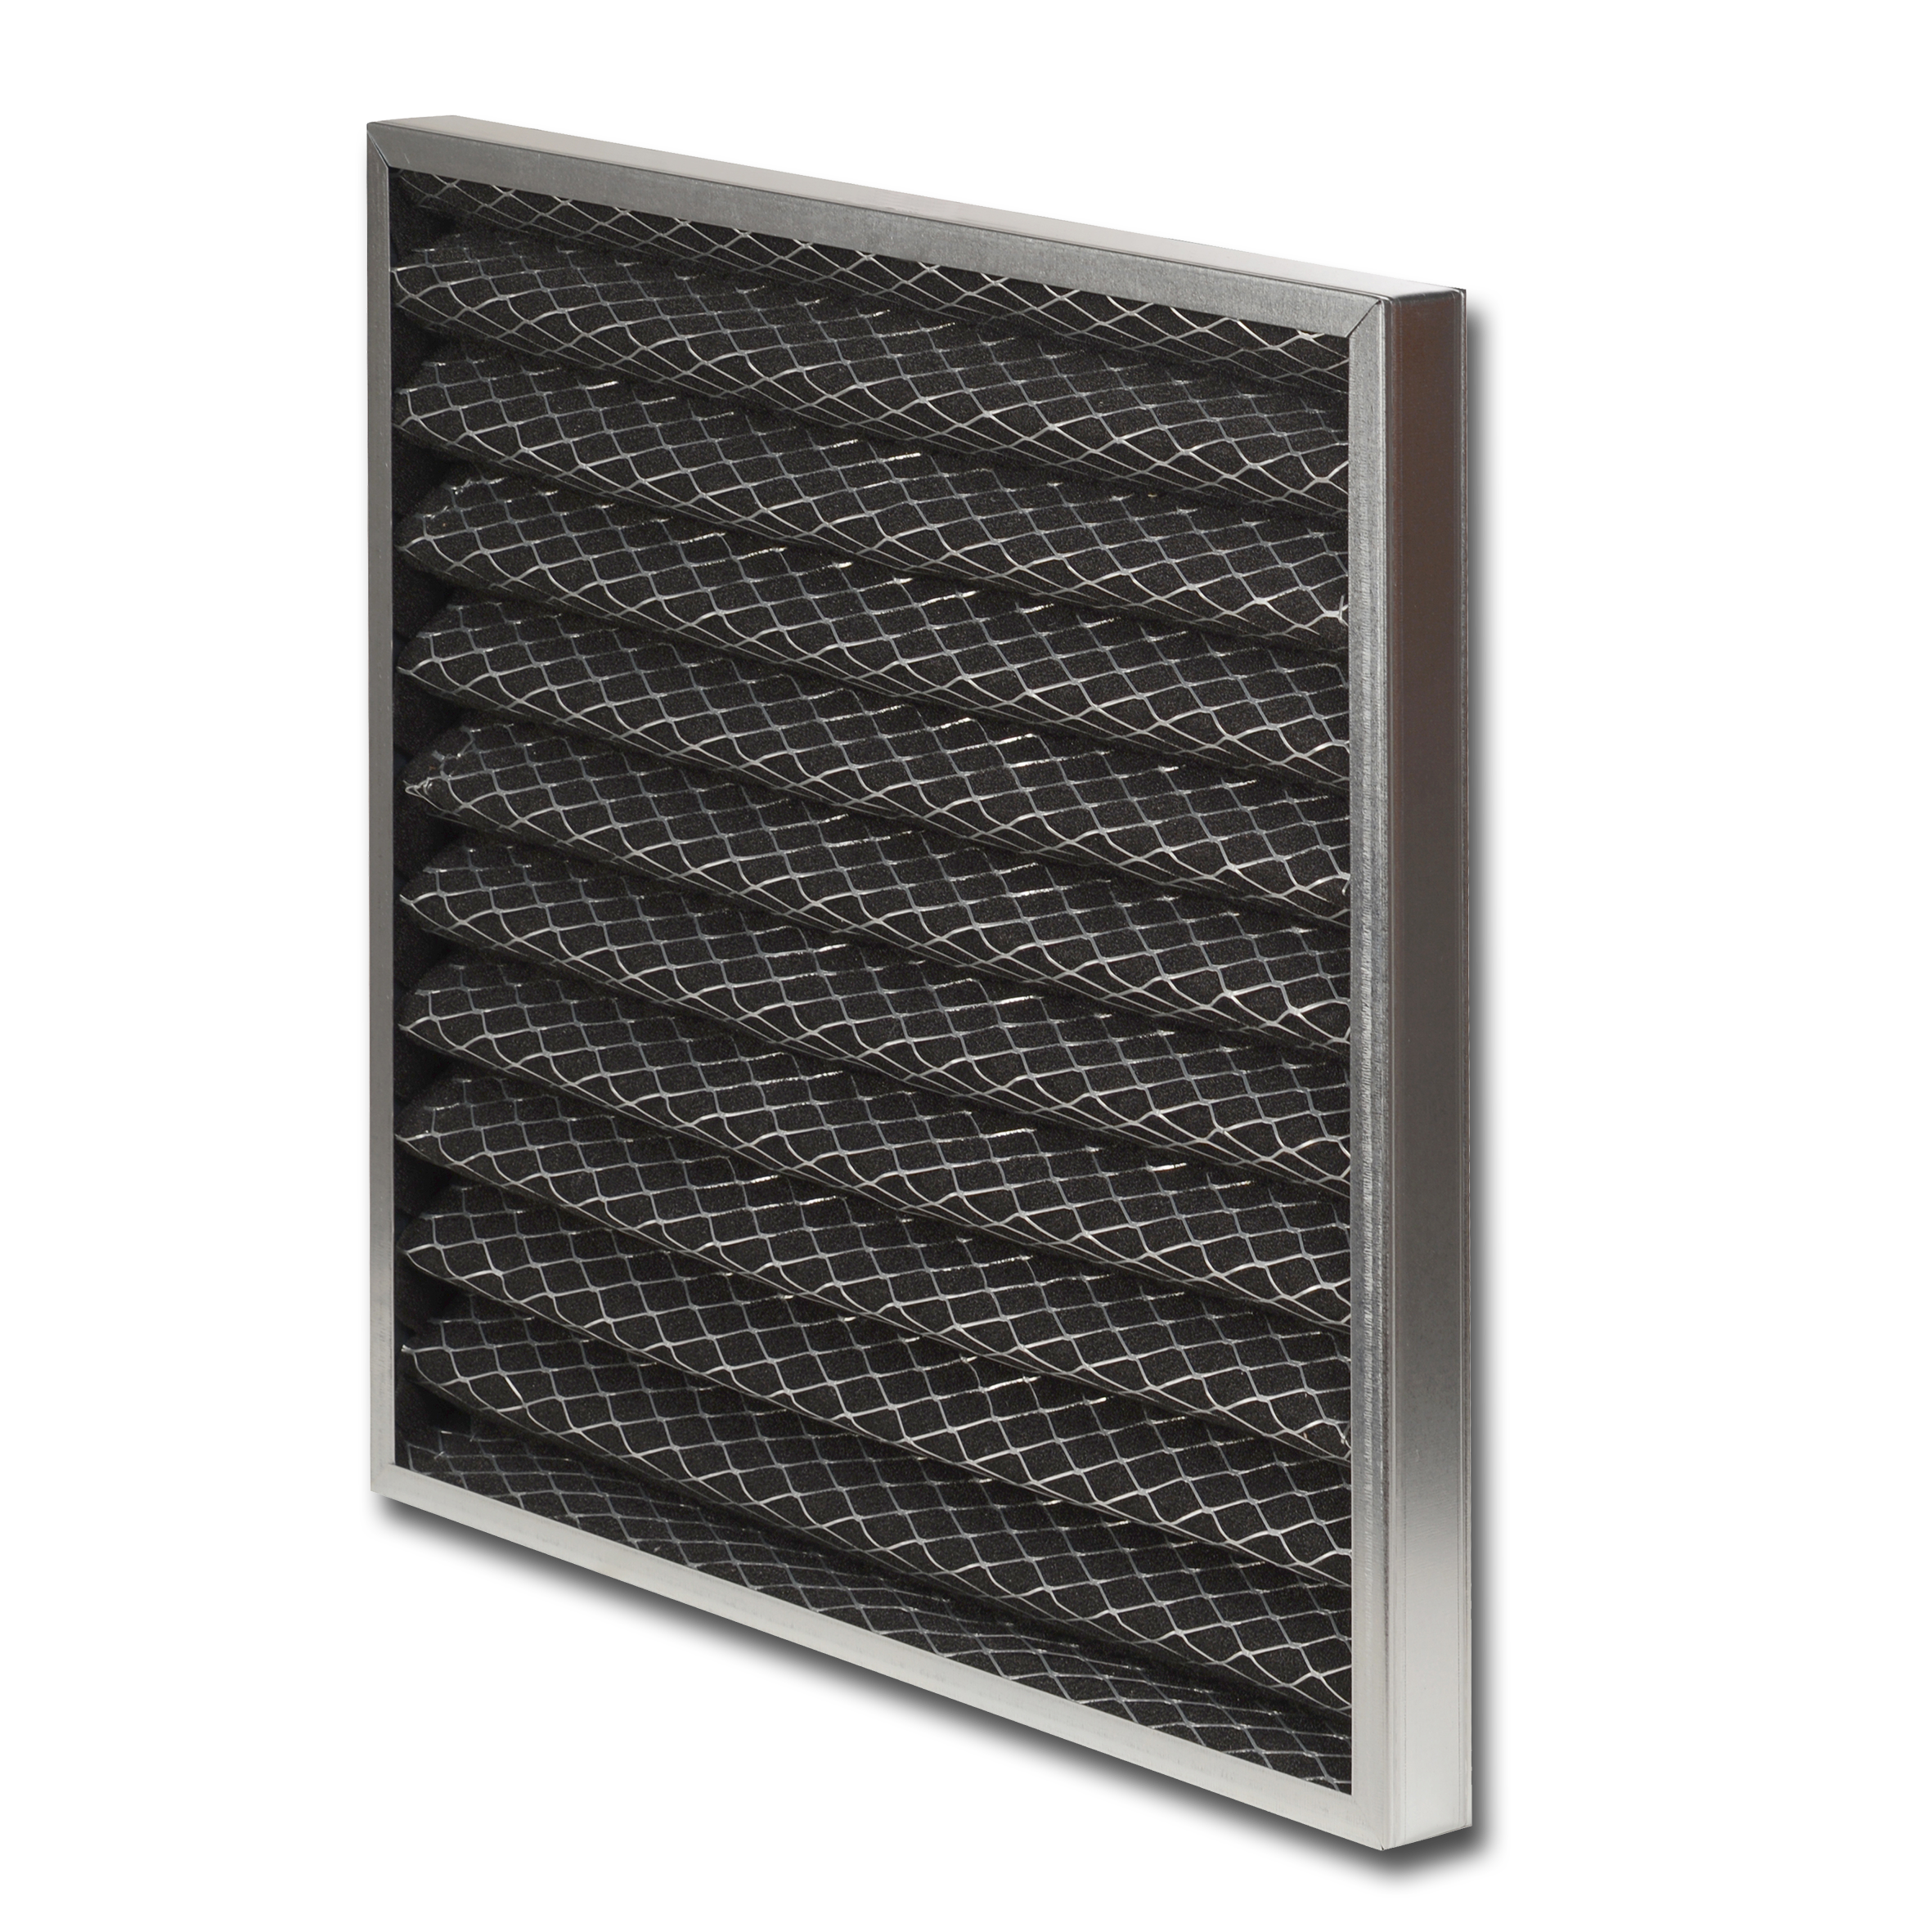 ACTIVATED CARBON ZIG-ZAG FILTER